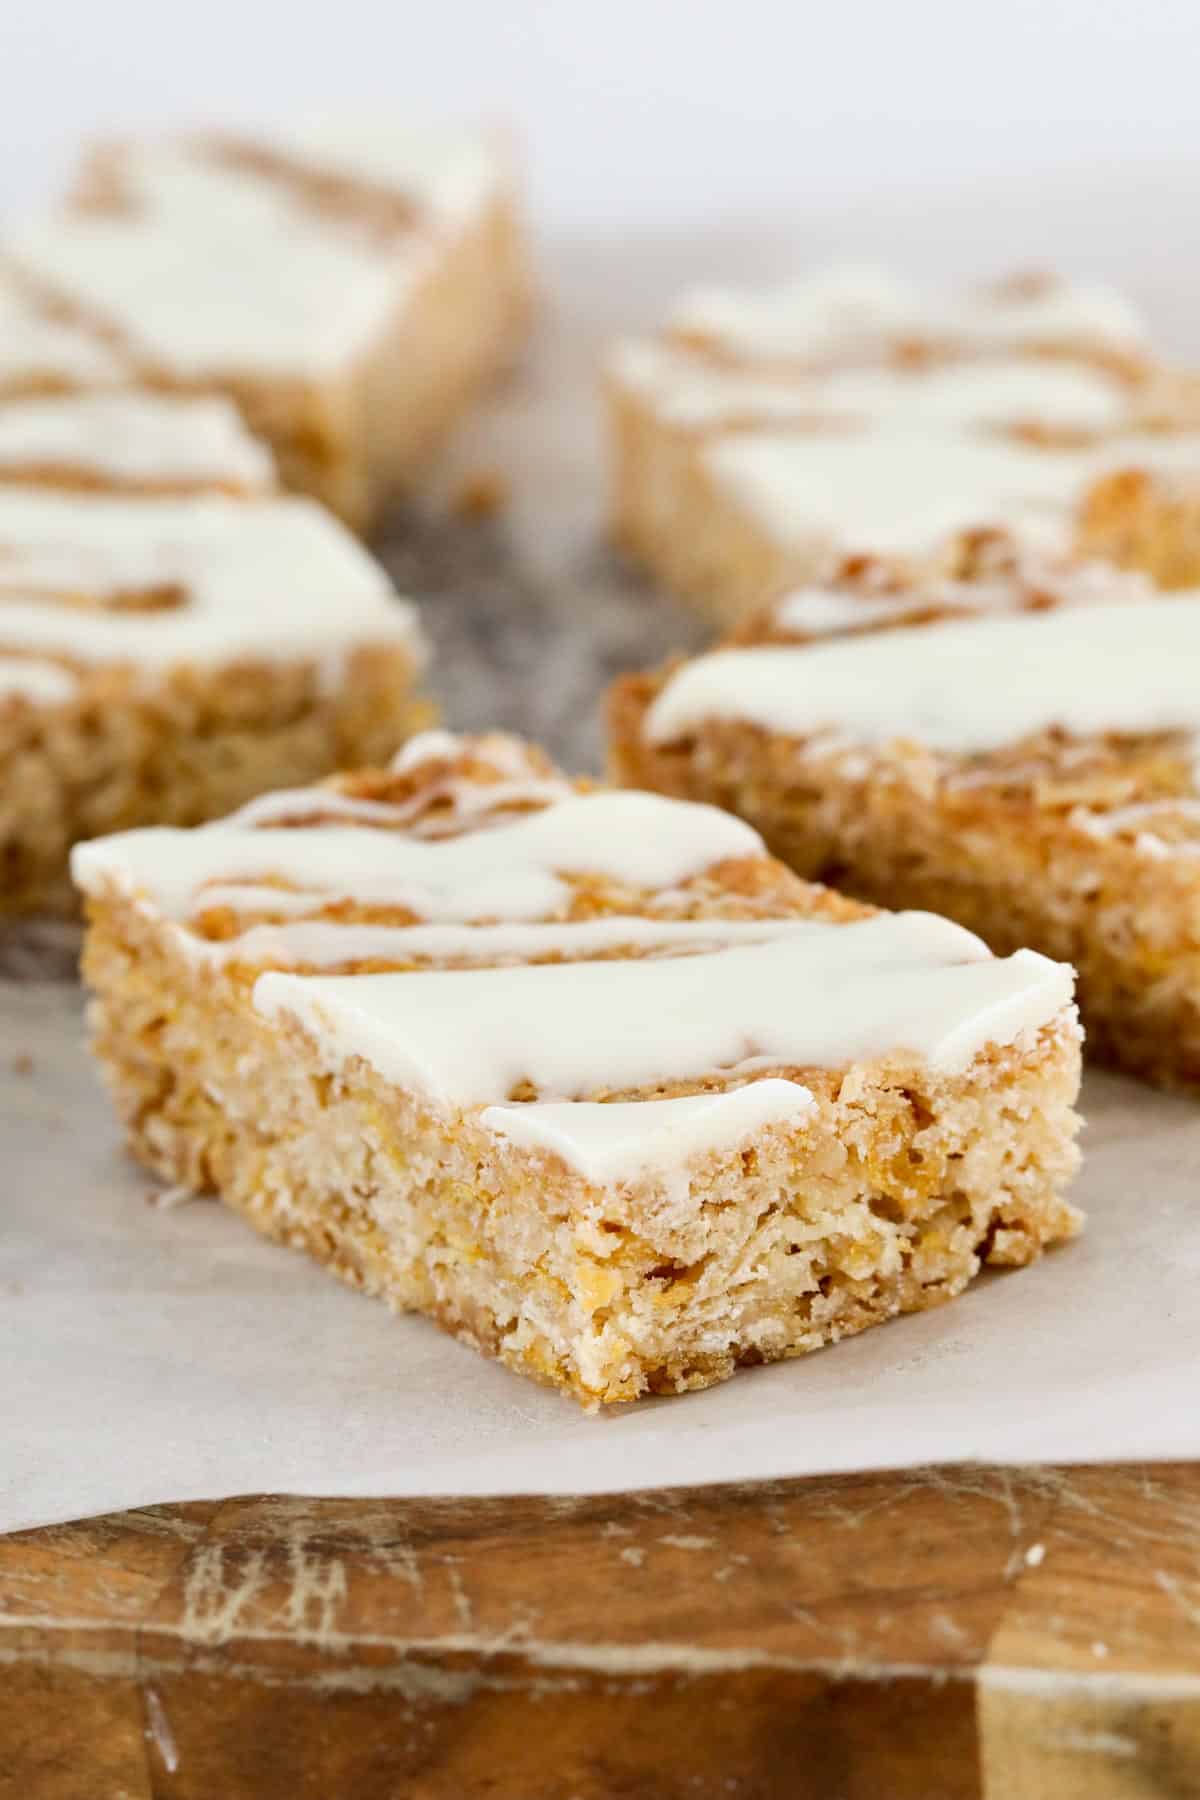 A piece of baked crunchy slice with white chocolate on top, placed on a wooden board.